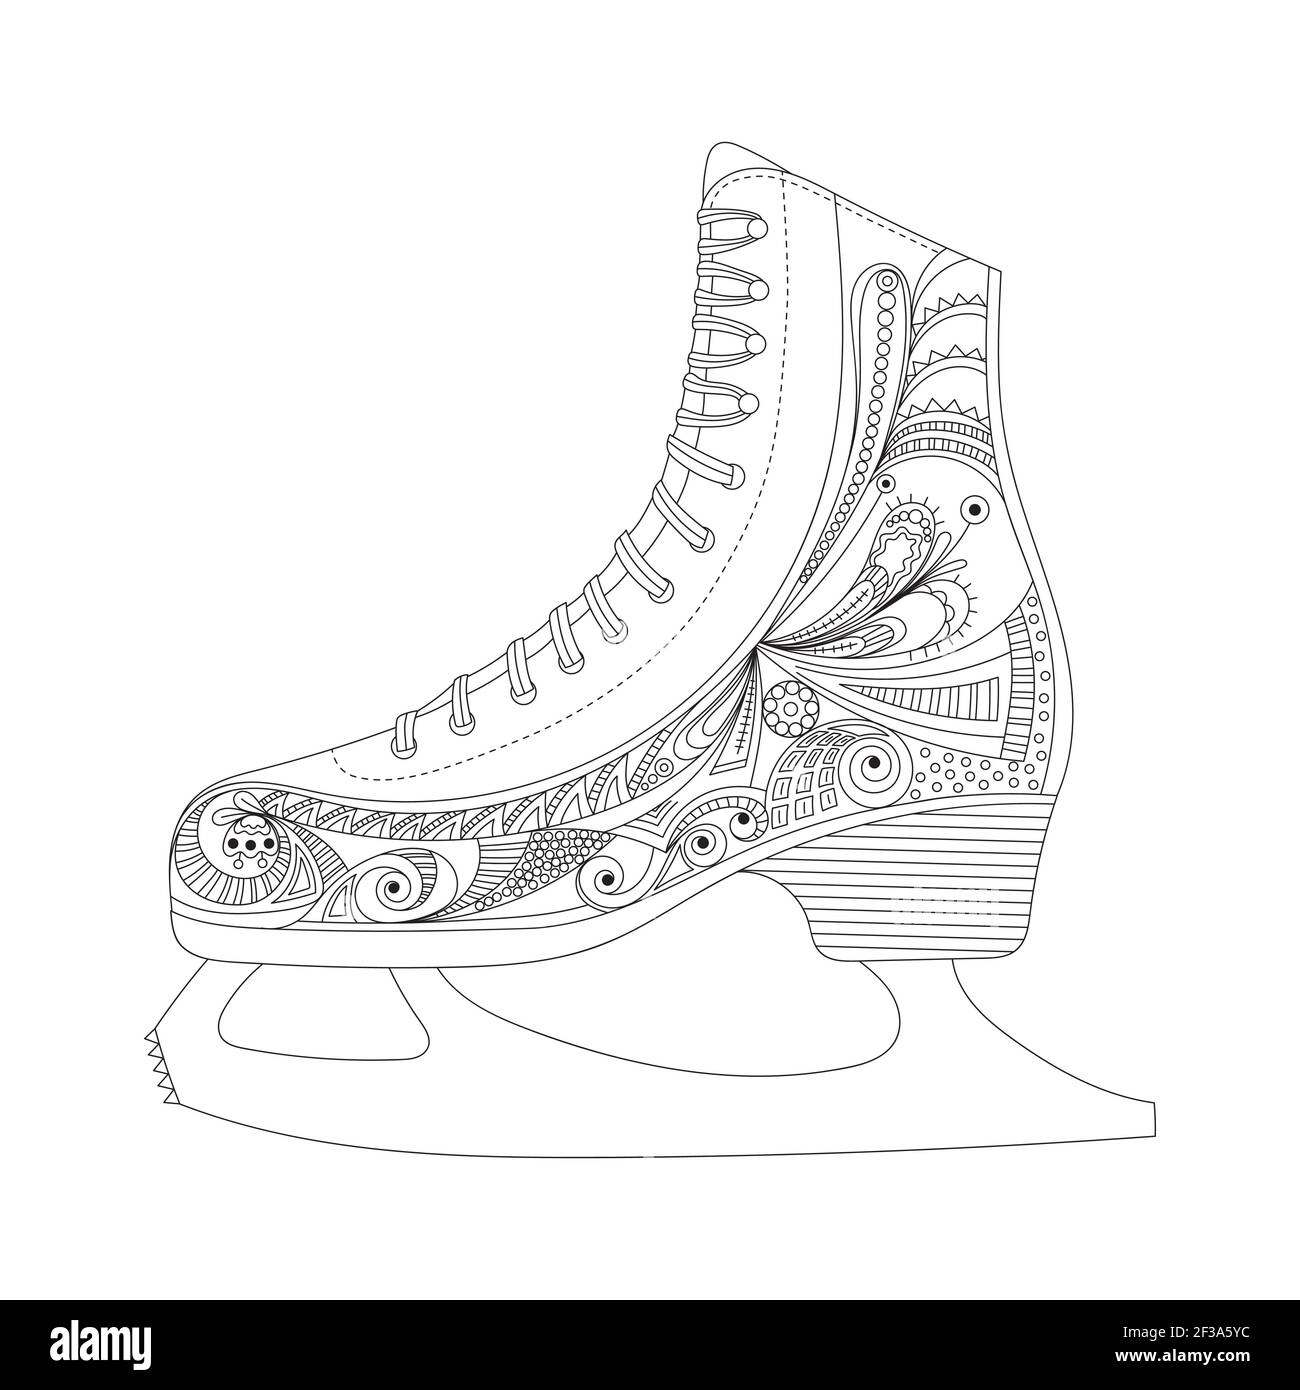 Figure skating skate vector illustration for coloring pages black and white on a white background stock vector image art